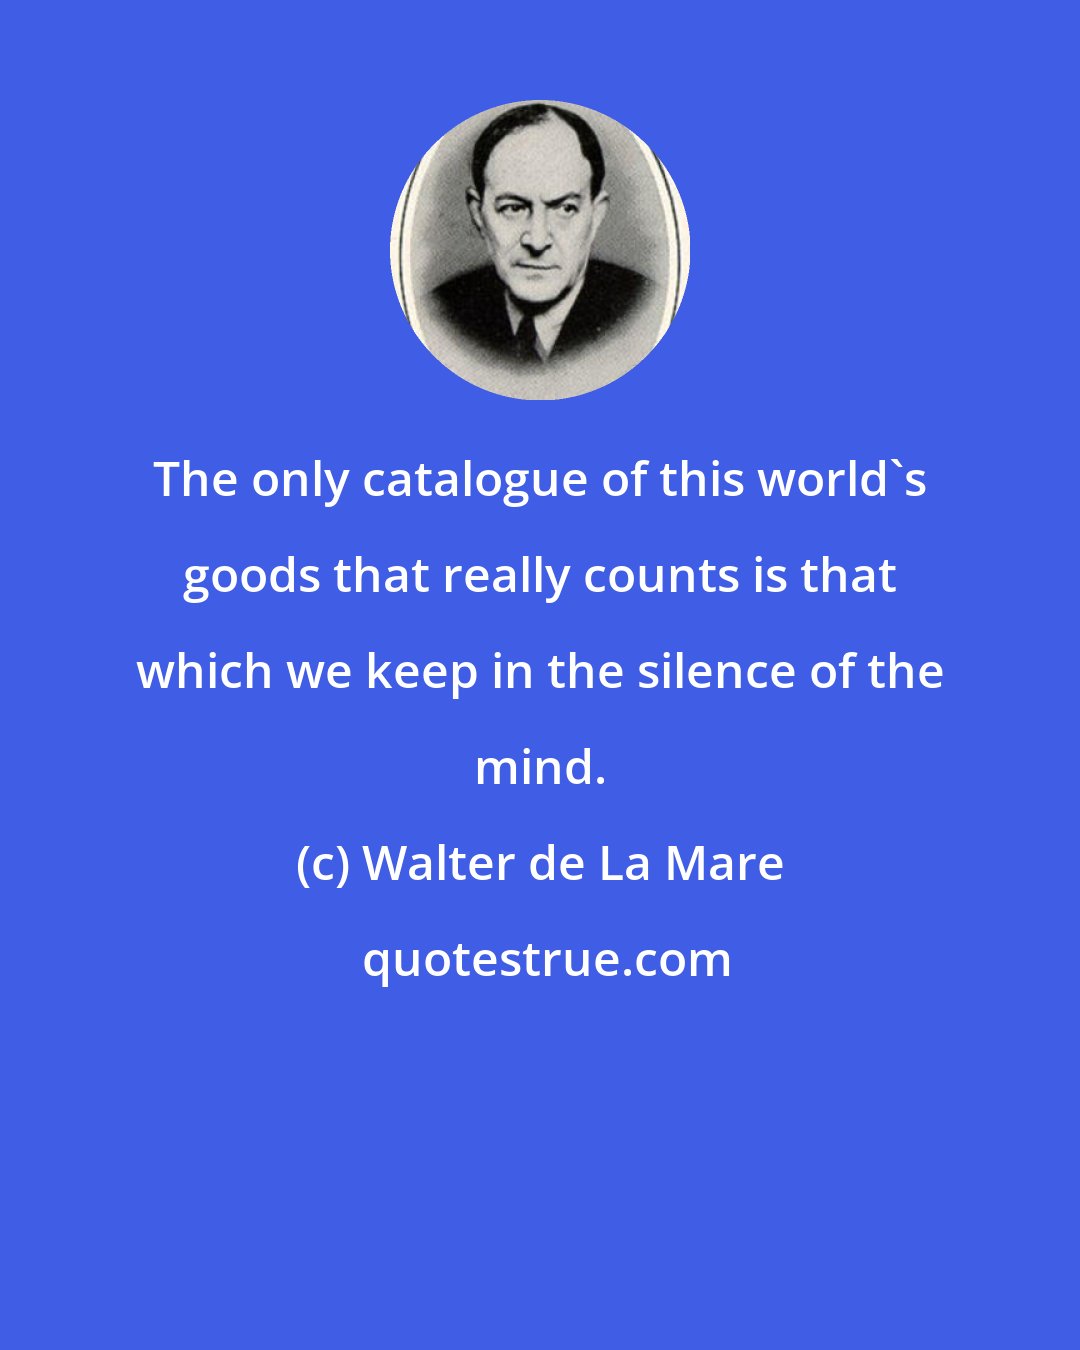 Walter de La Mare: The only catalogue of this world's goods that really counts is that which we keep in the silence of the mind.